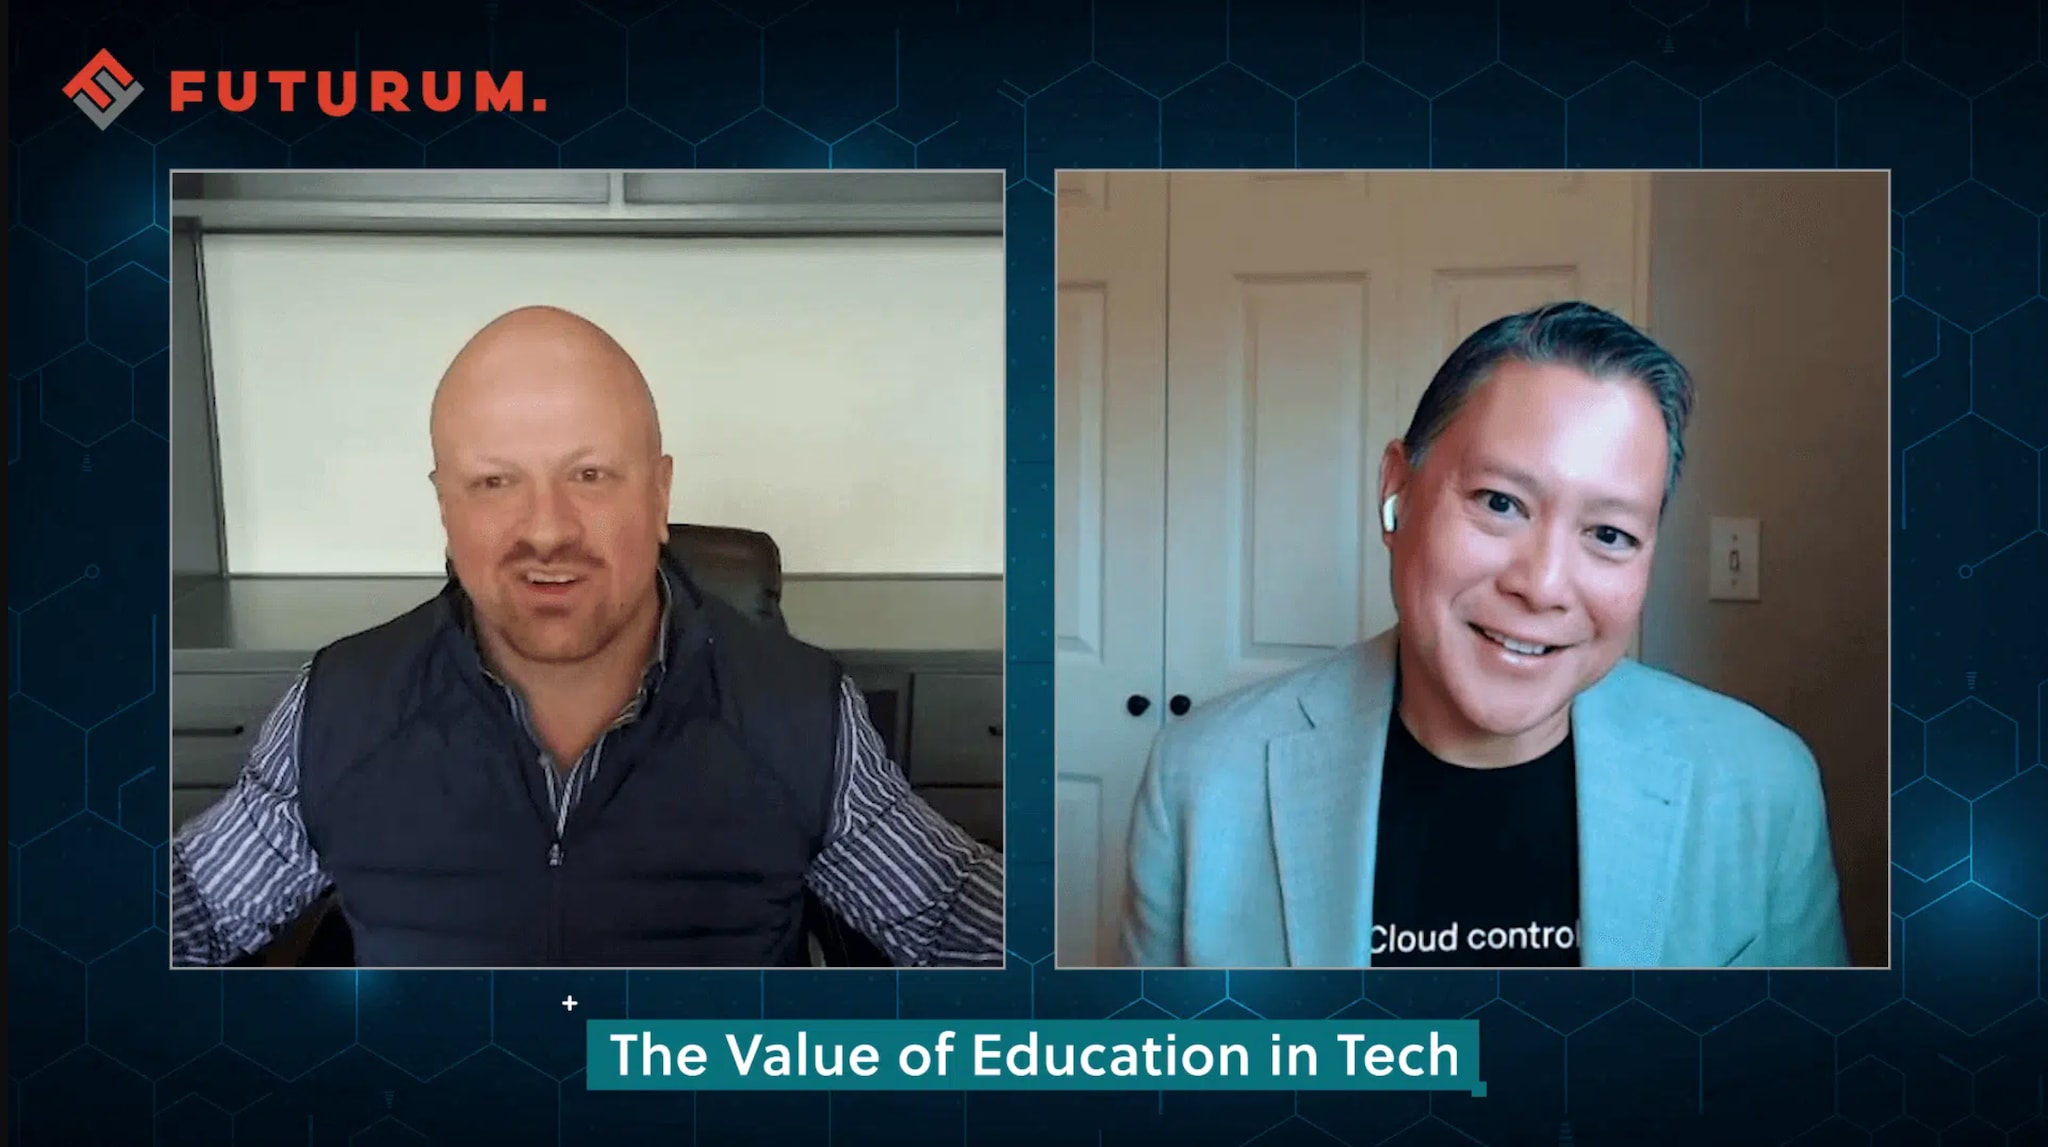 The Value of Education in Tech